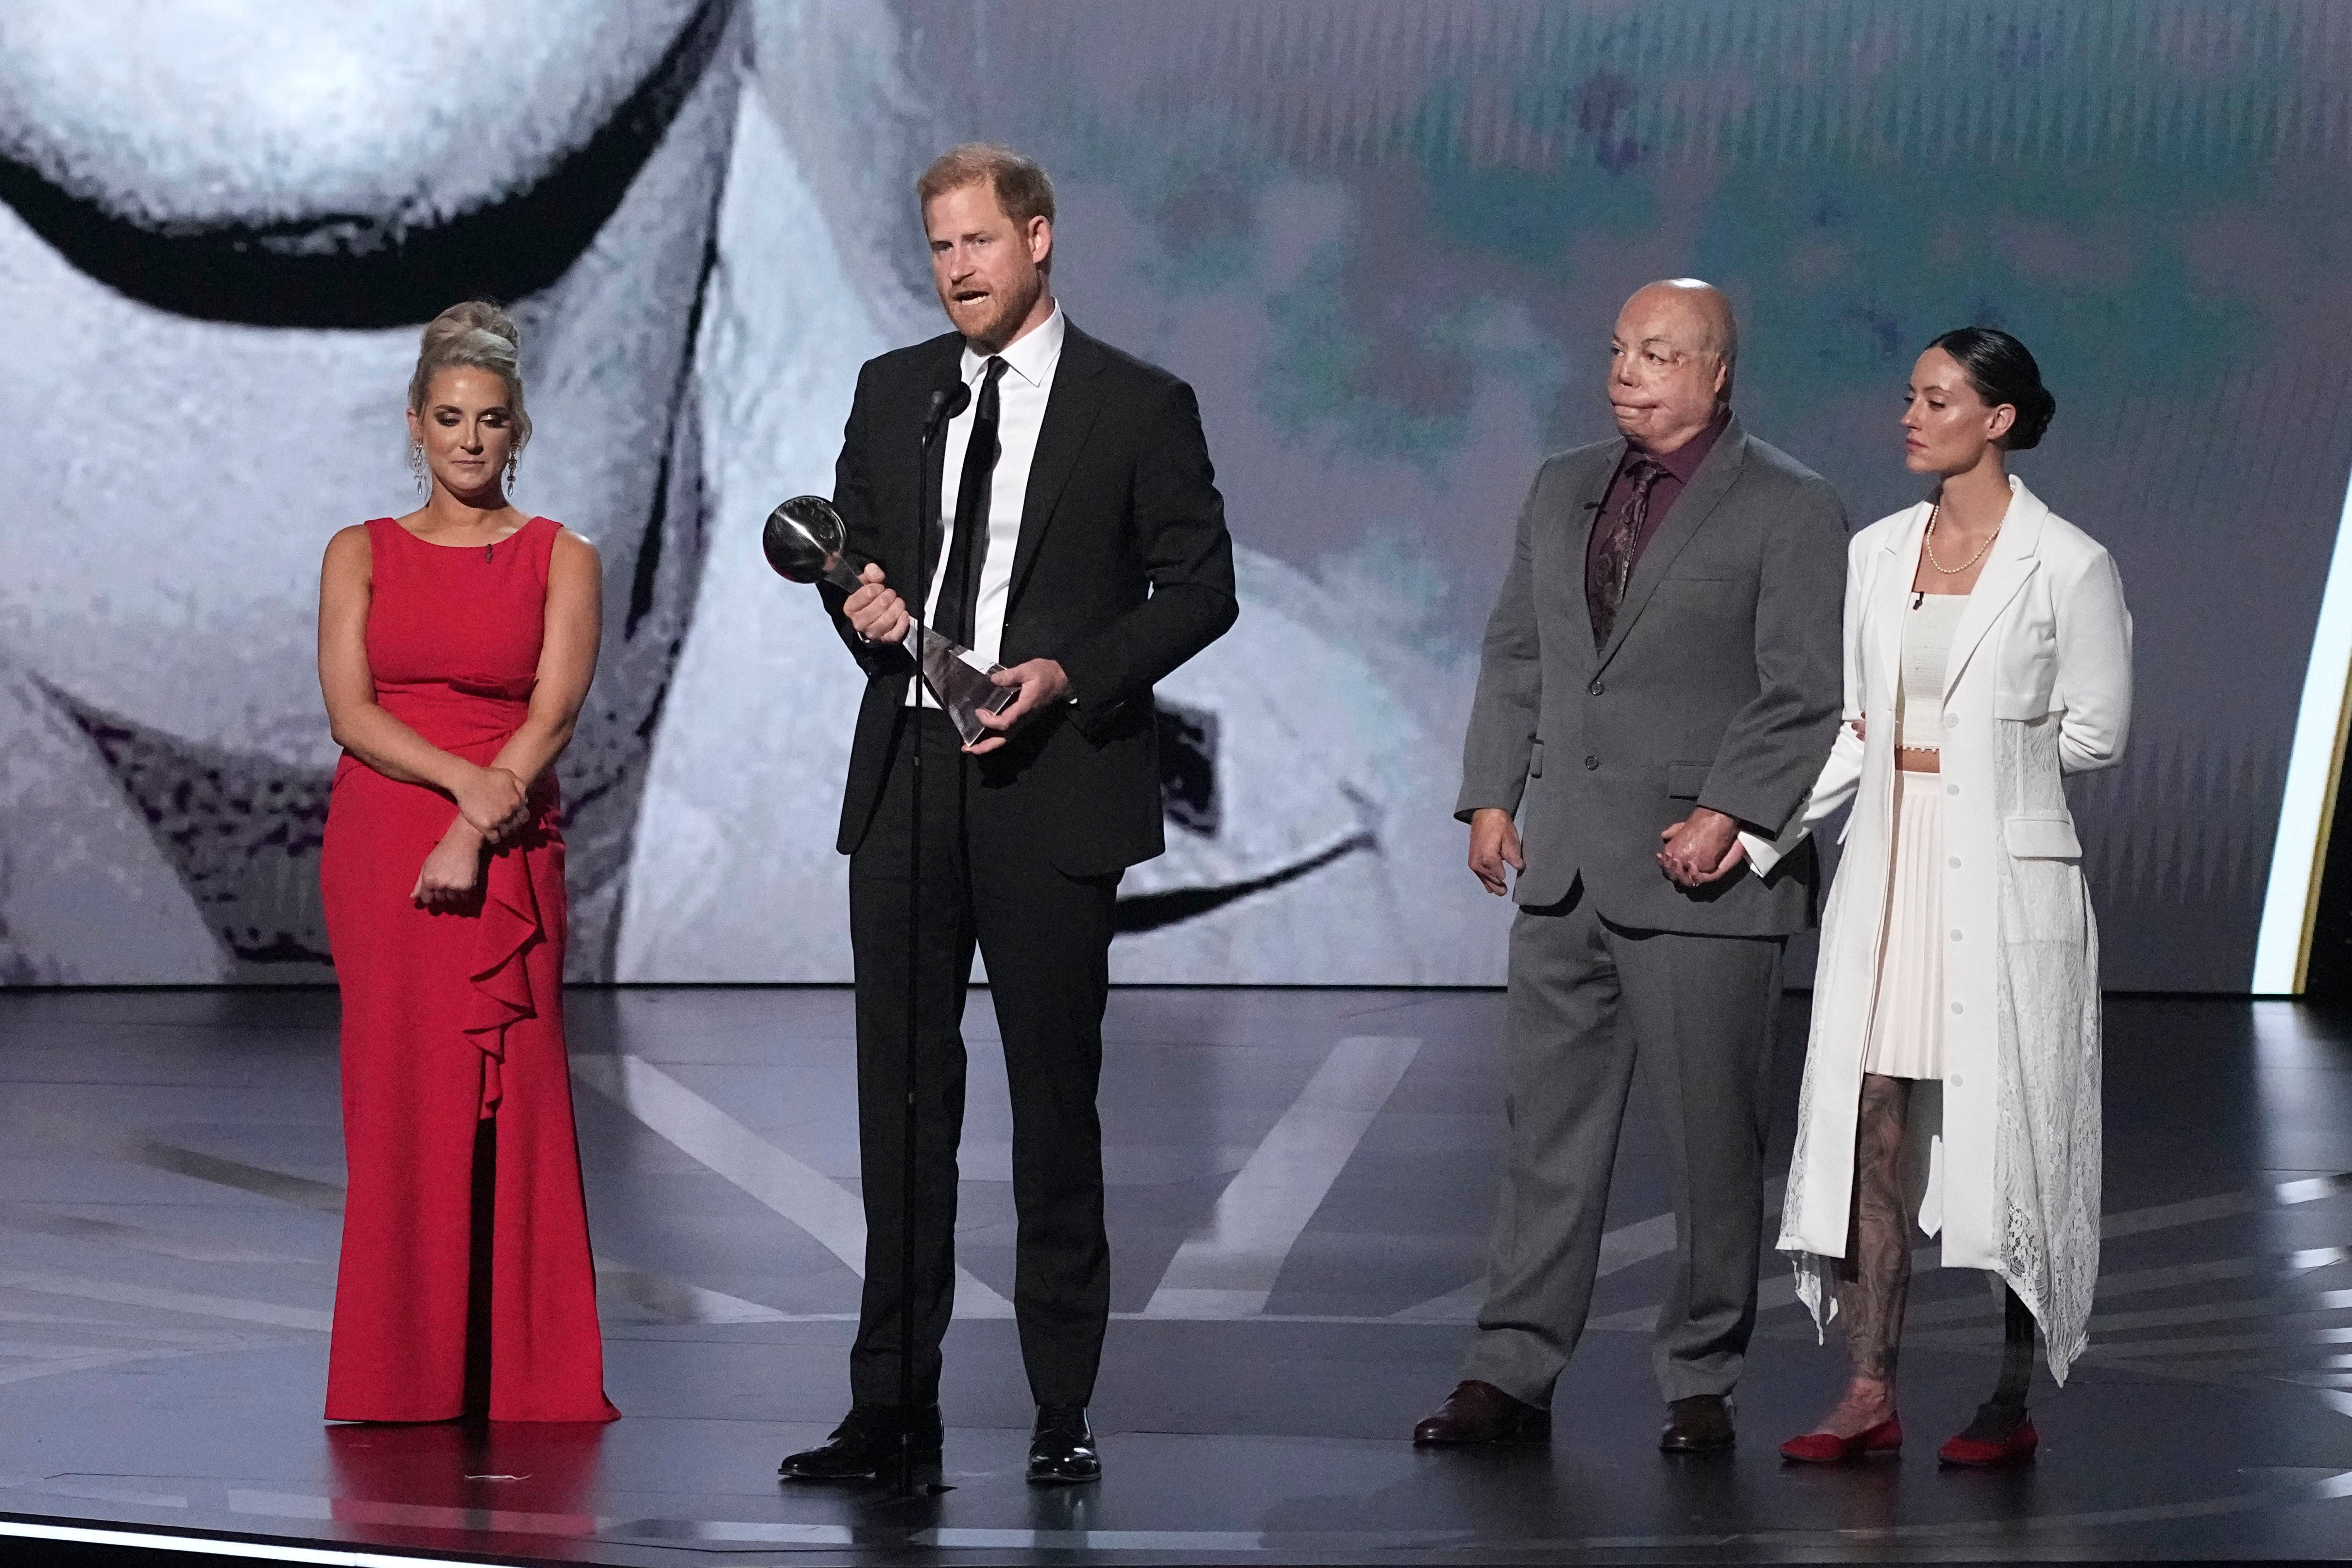 Prince Harry speaks after receiving the Pat Tillman Award For Service at the ESPY Awards (Mark J Terrill/PA)